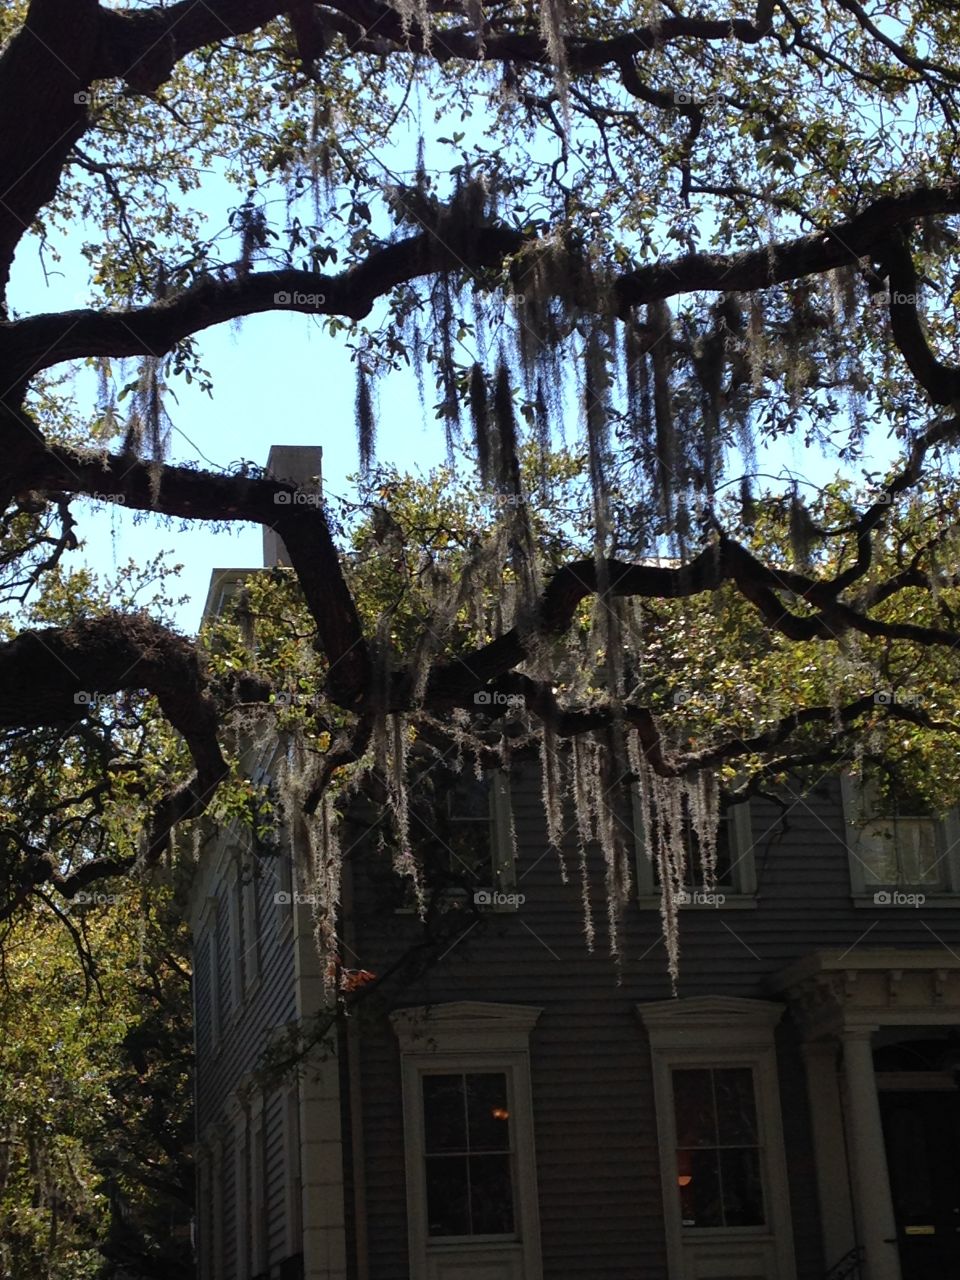 Spanish moss drowning the old oak